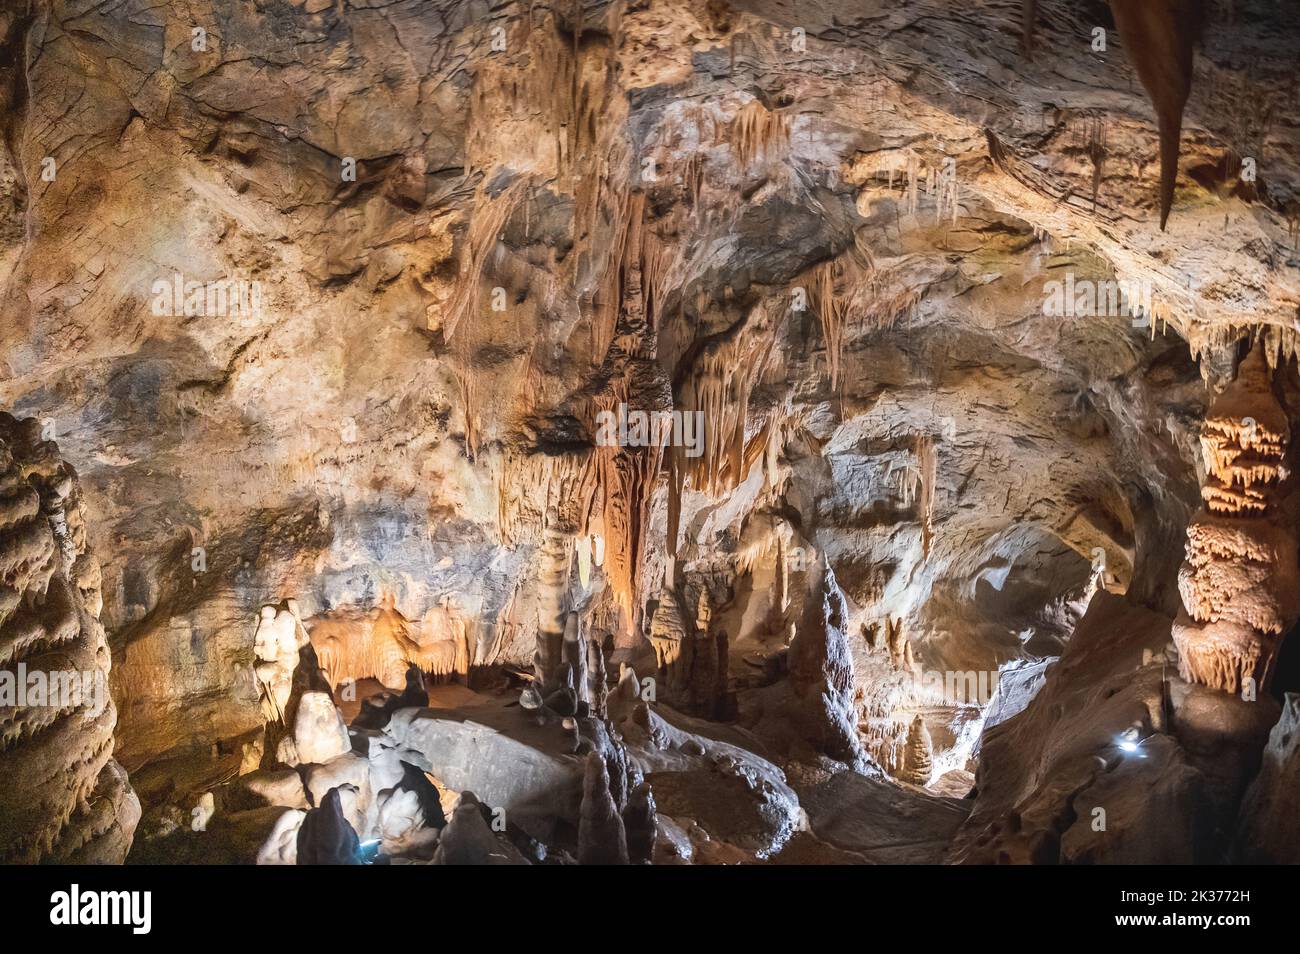 Grotte di Toirano meaning Toirano Caves are a karst cave system in Toirano, Italy Stock Photo